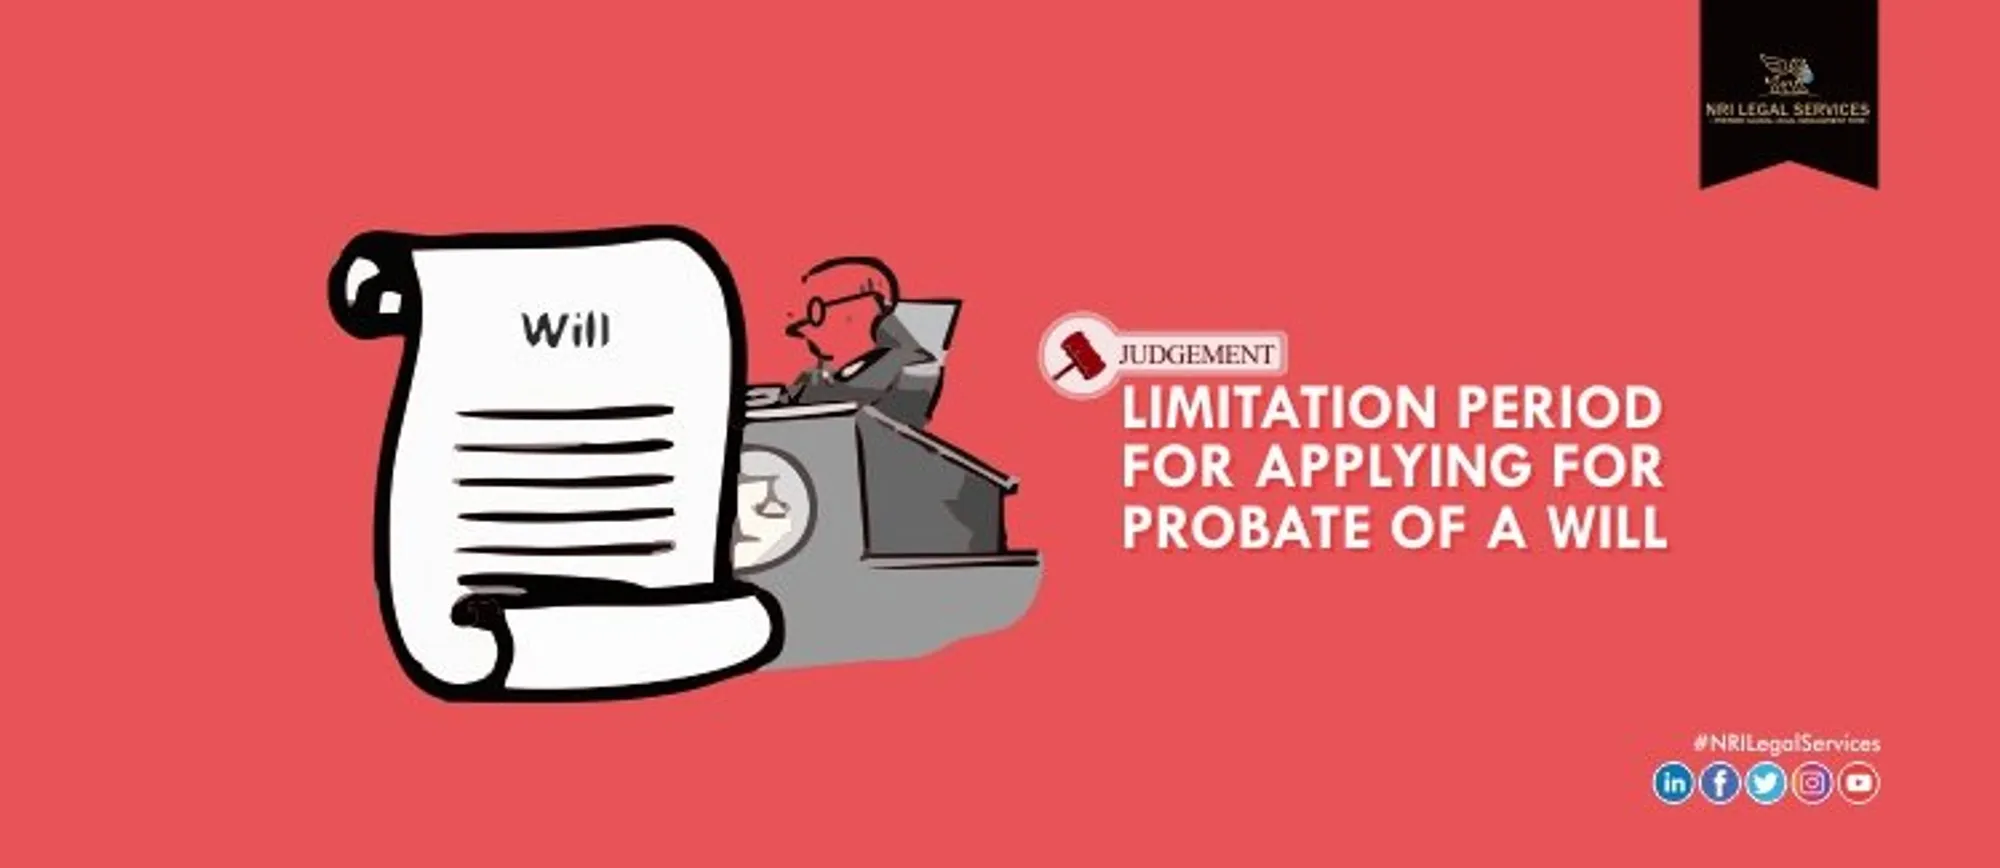 Limitation Period for Applying for Probate of a Will an Analysis Based on Court Judgments